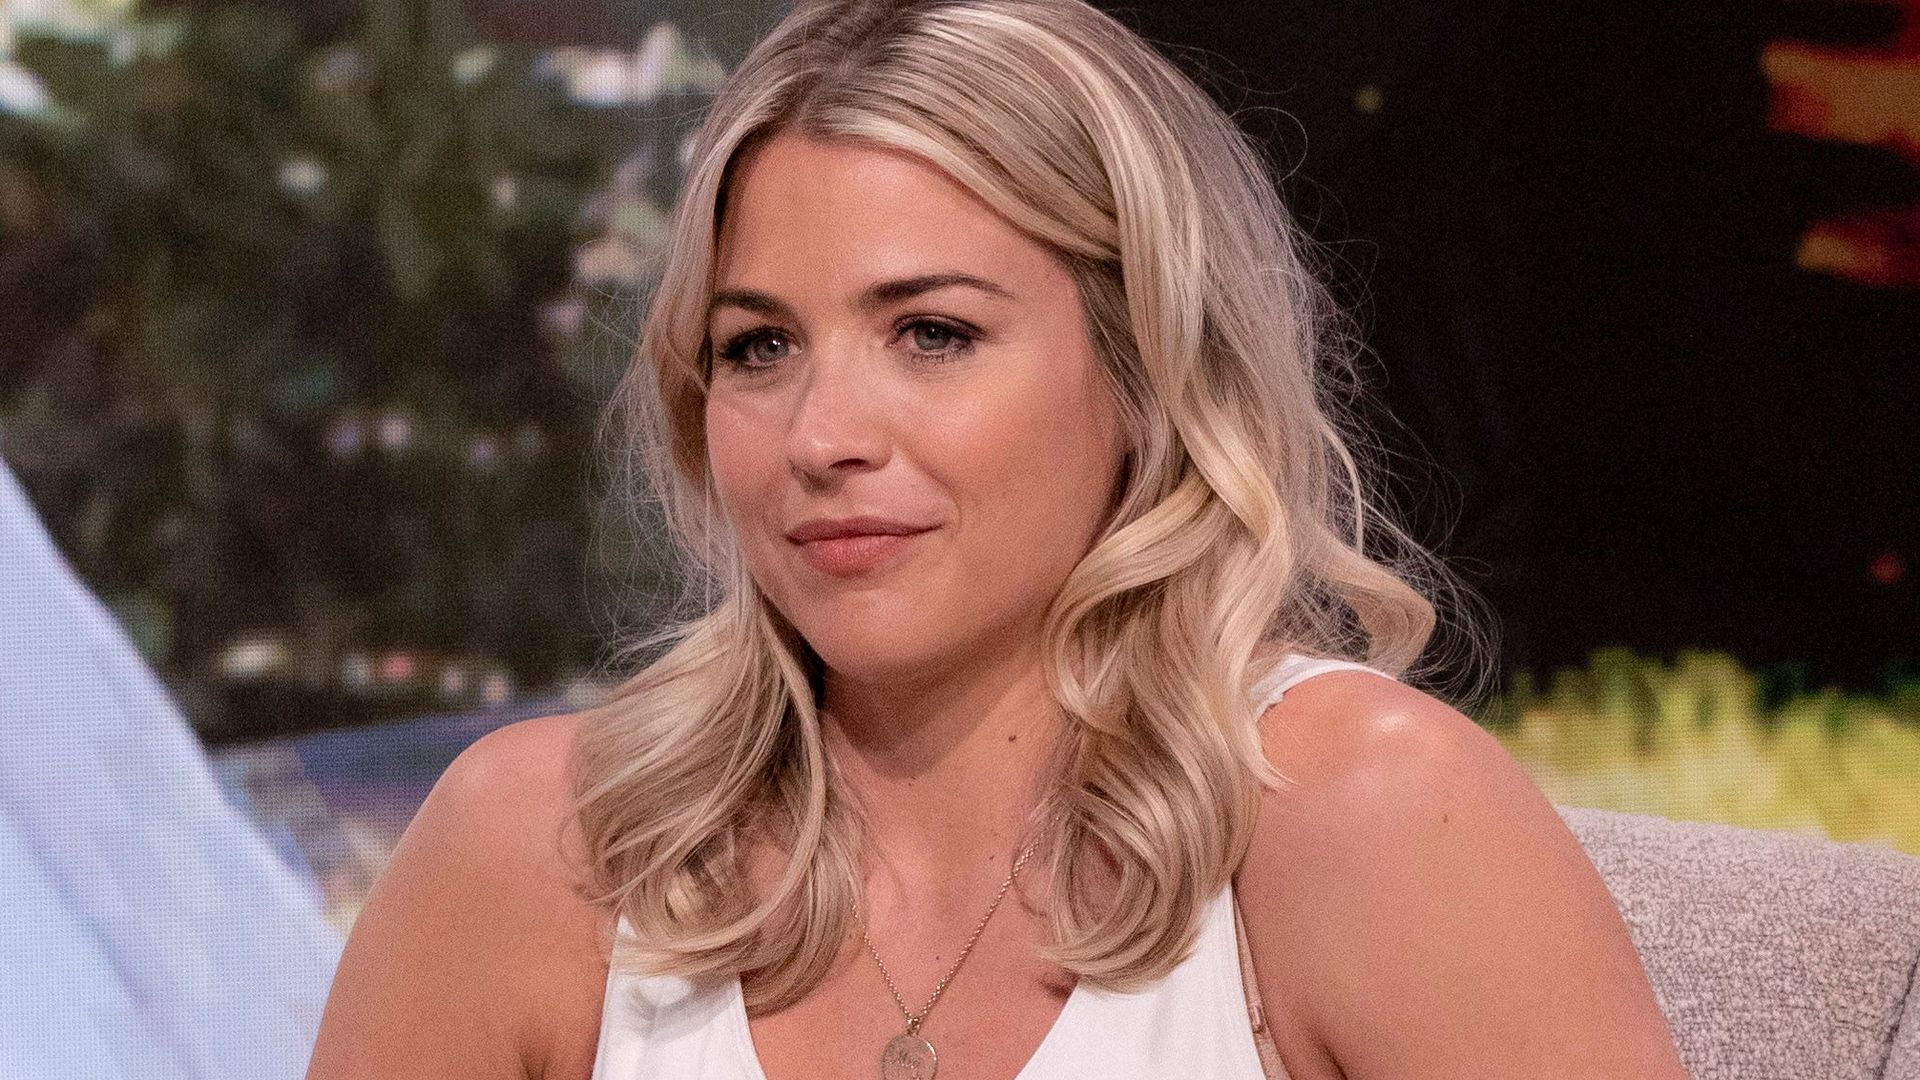 Gemma Atkinson in a white top and jeans on Lorraine